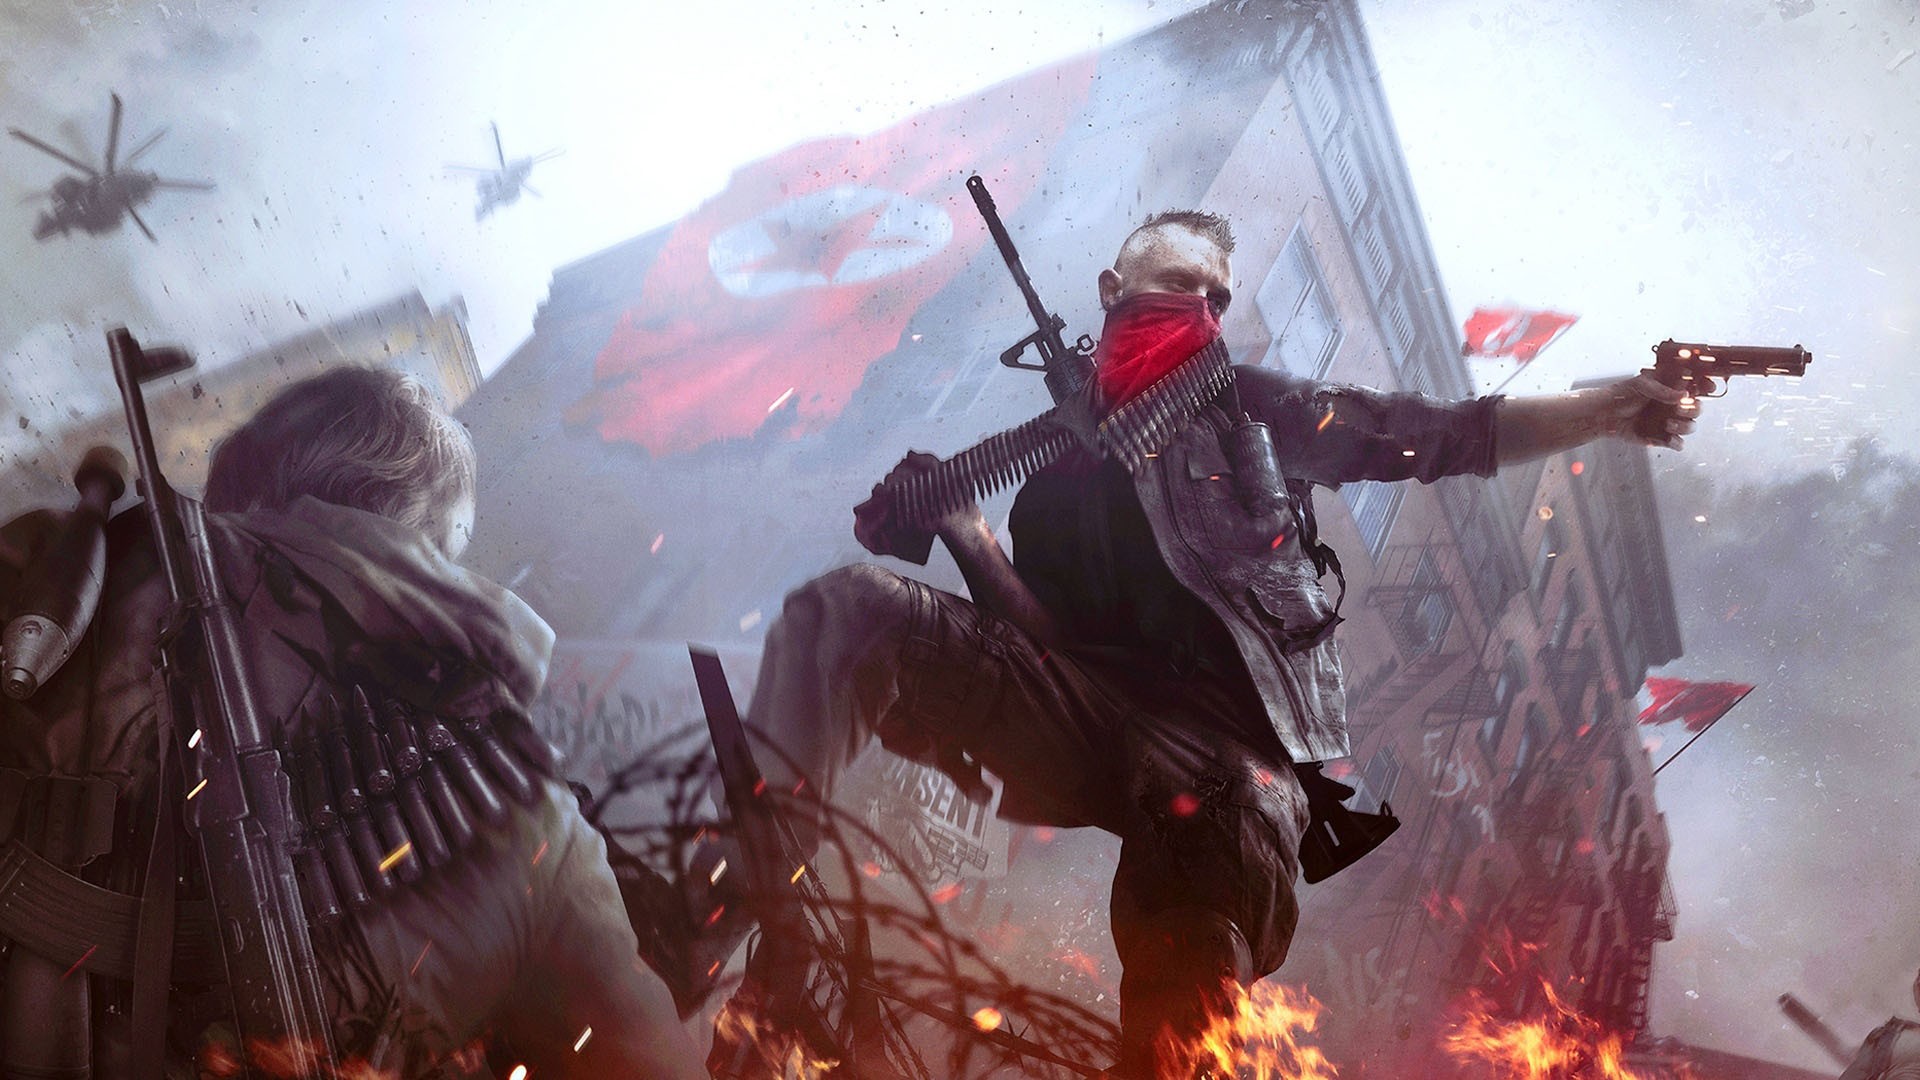 General 1920x1080 Homefront Homefront: The Revolution PC gaming gun video game art video games video game men weapon low-angle